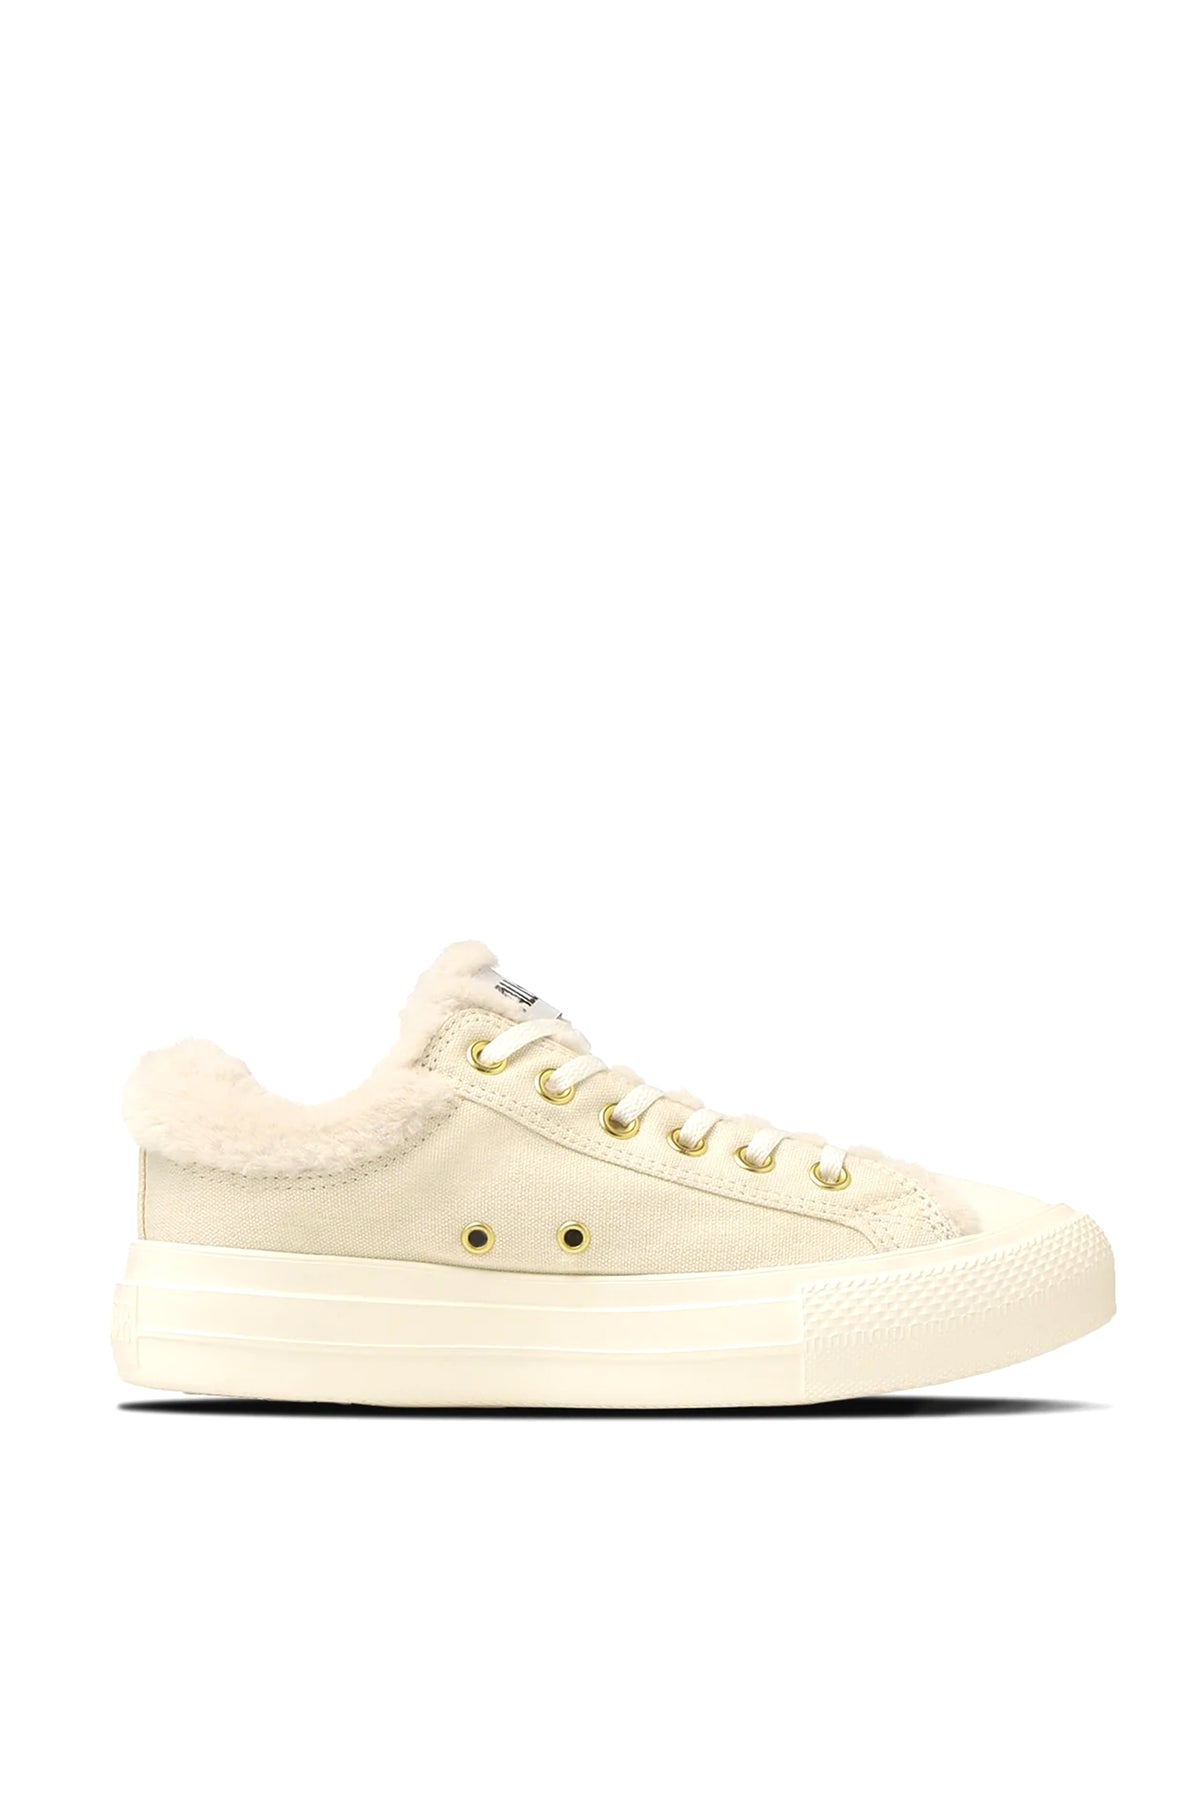 CONVERSE ALL STAR LIGHT PLTS BOACOLLAR OX / CRM